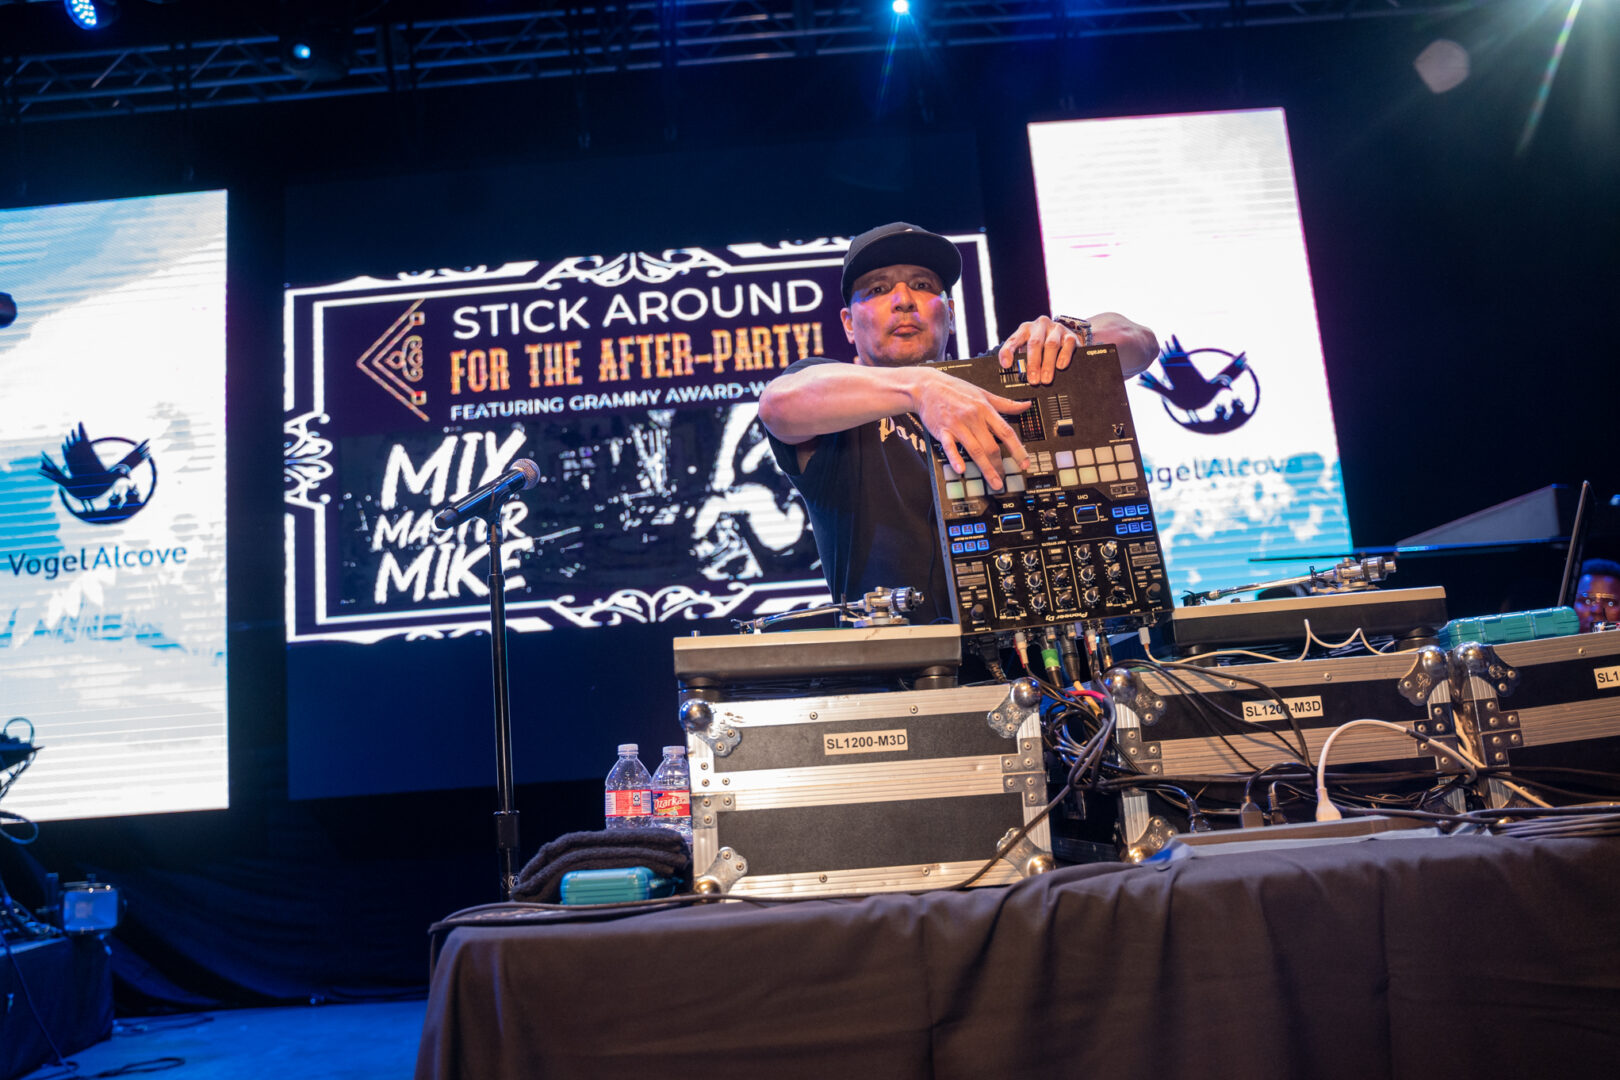 Image of Mix Master Mike with his DJ equipment at the 30th Annual Arts Performance Event after-party